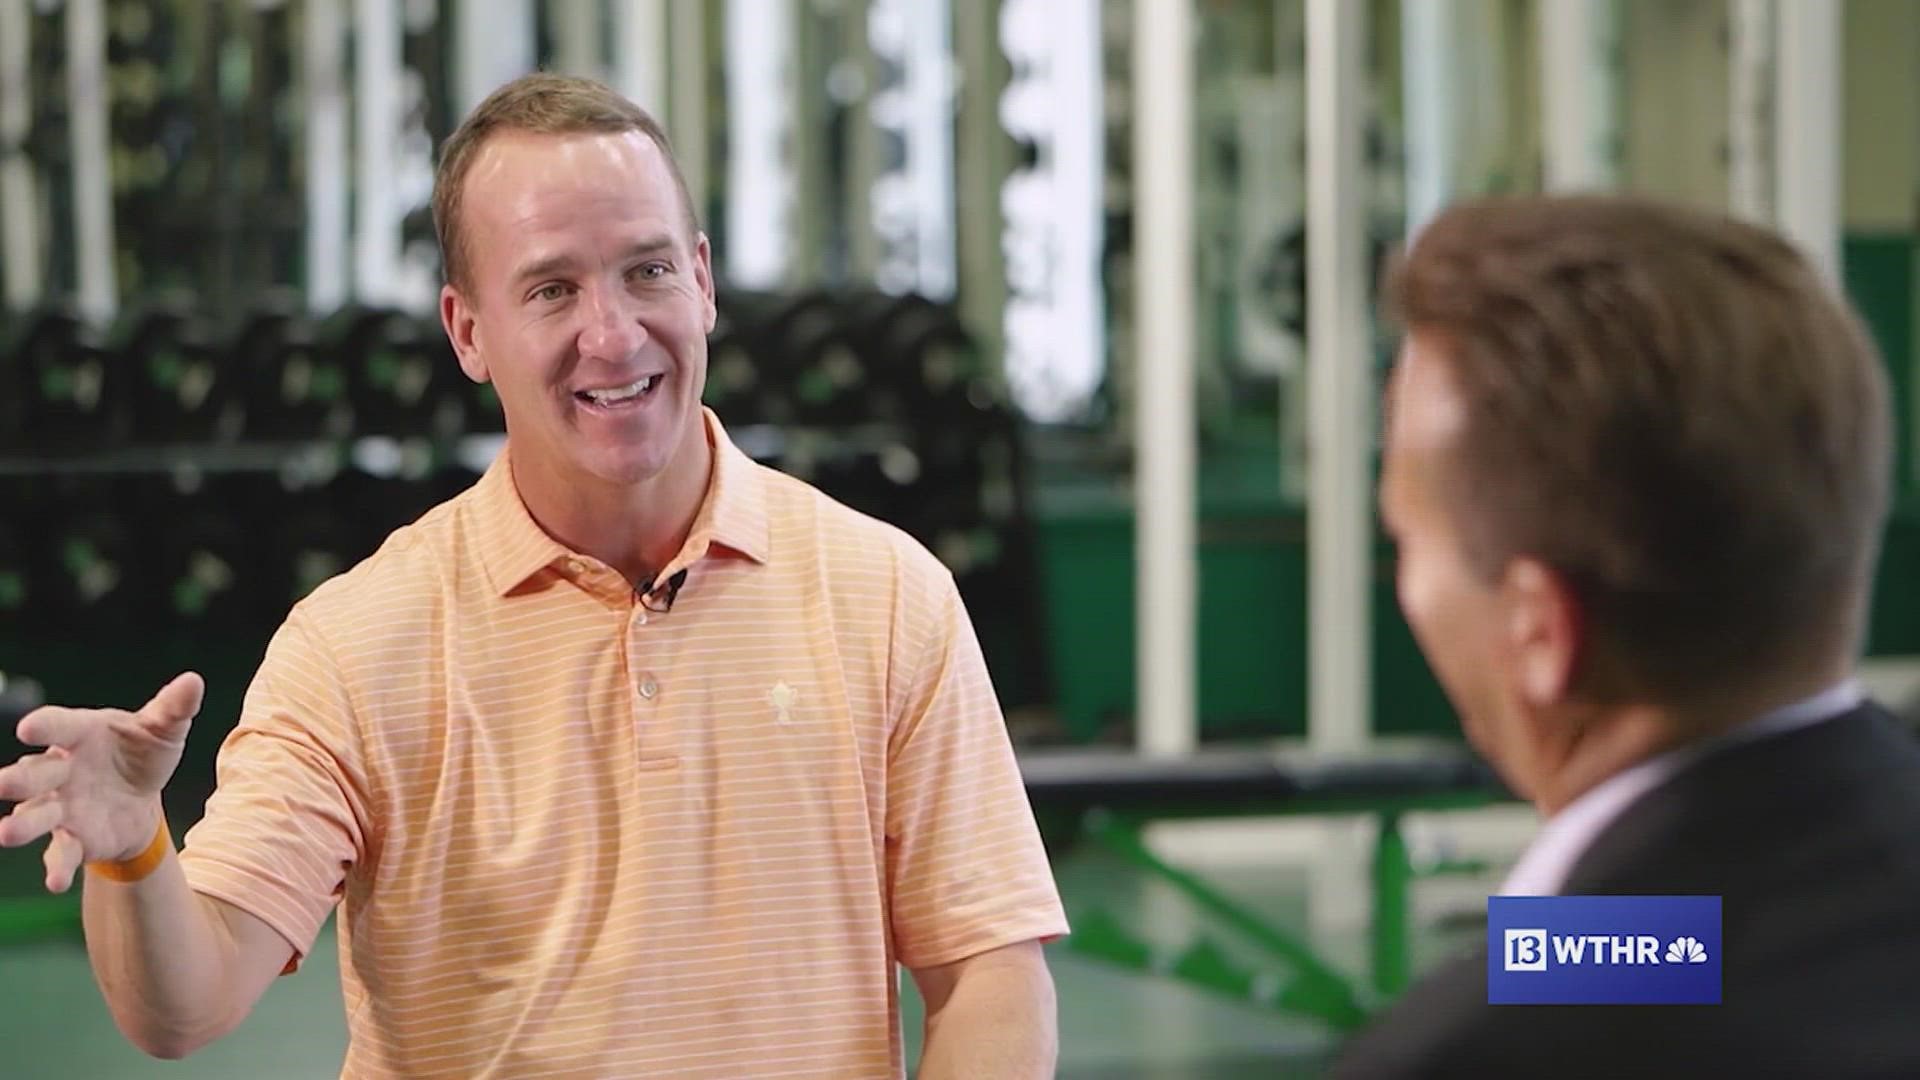 Indianapolis Colts Hall of Fame quarterback Peyton Manning is being inducted into the Pro Football Hall of Fame. #18 sat down Dave Calabro to revisit his career.